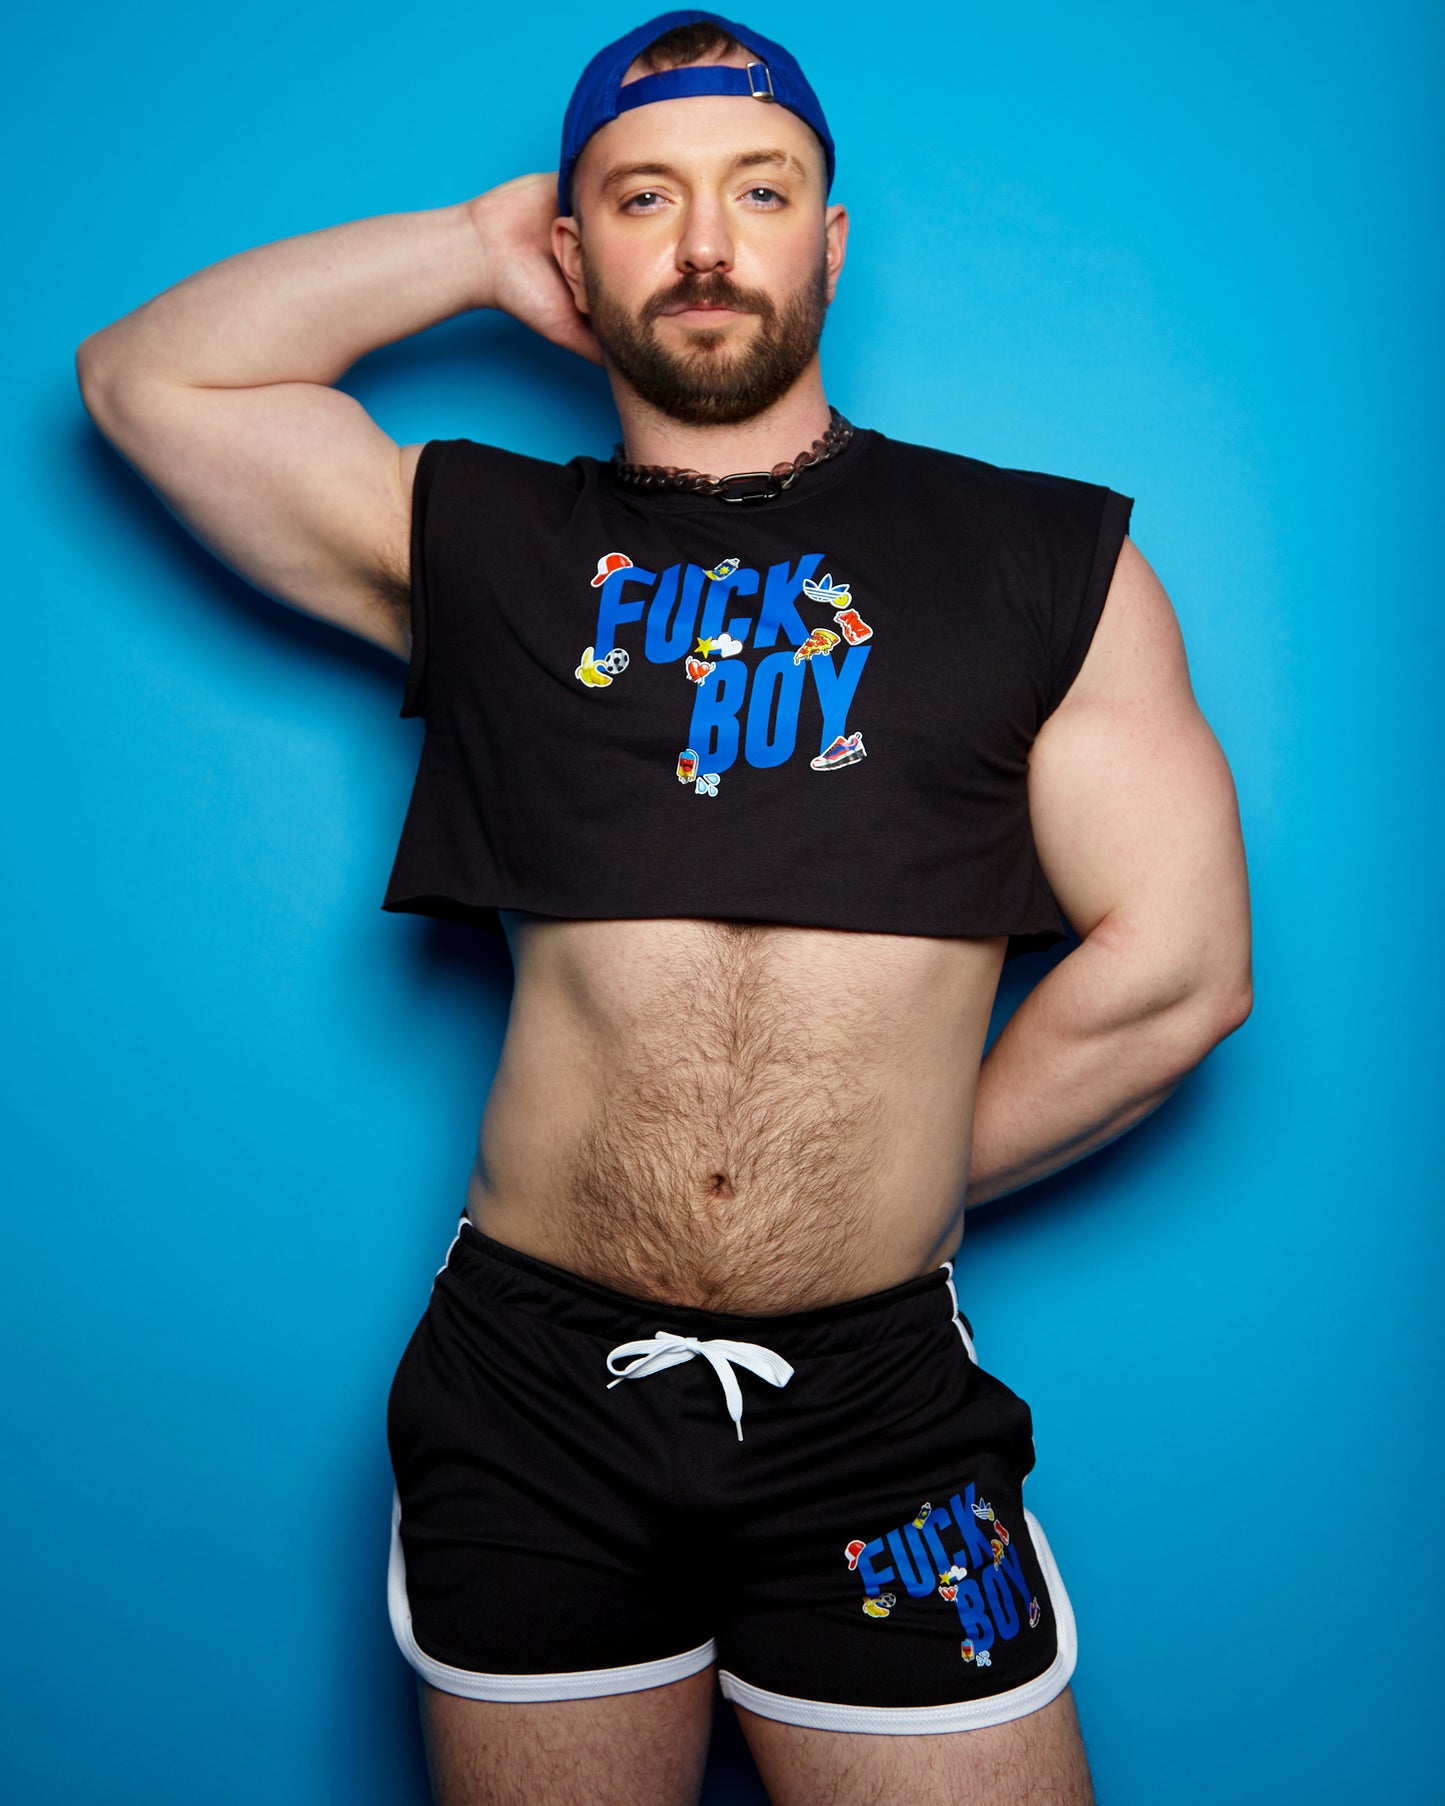 Double pack - F-boy, blue on black, sleeveless crop and short shorts - Full outfit.